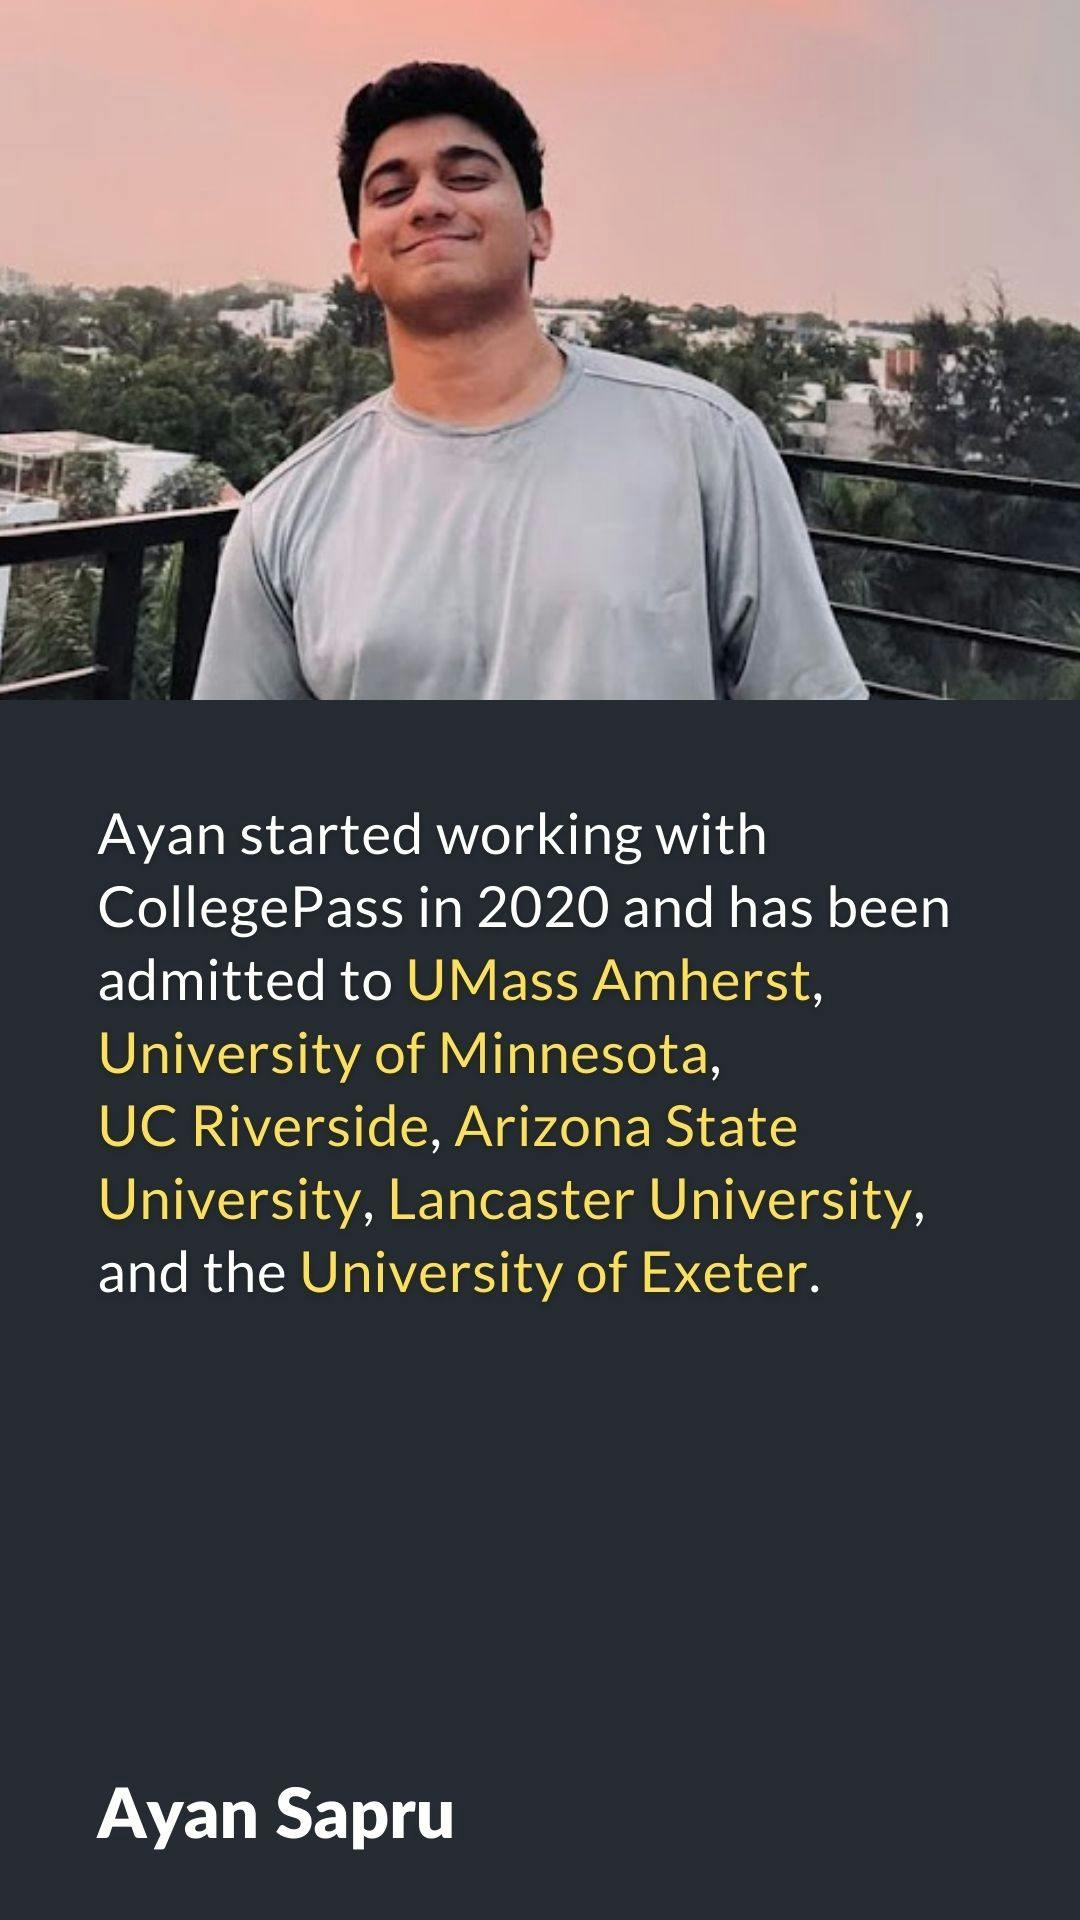 Ayan started working with collegePass in 2020 and has been admitted to UMass etc.